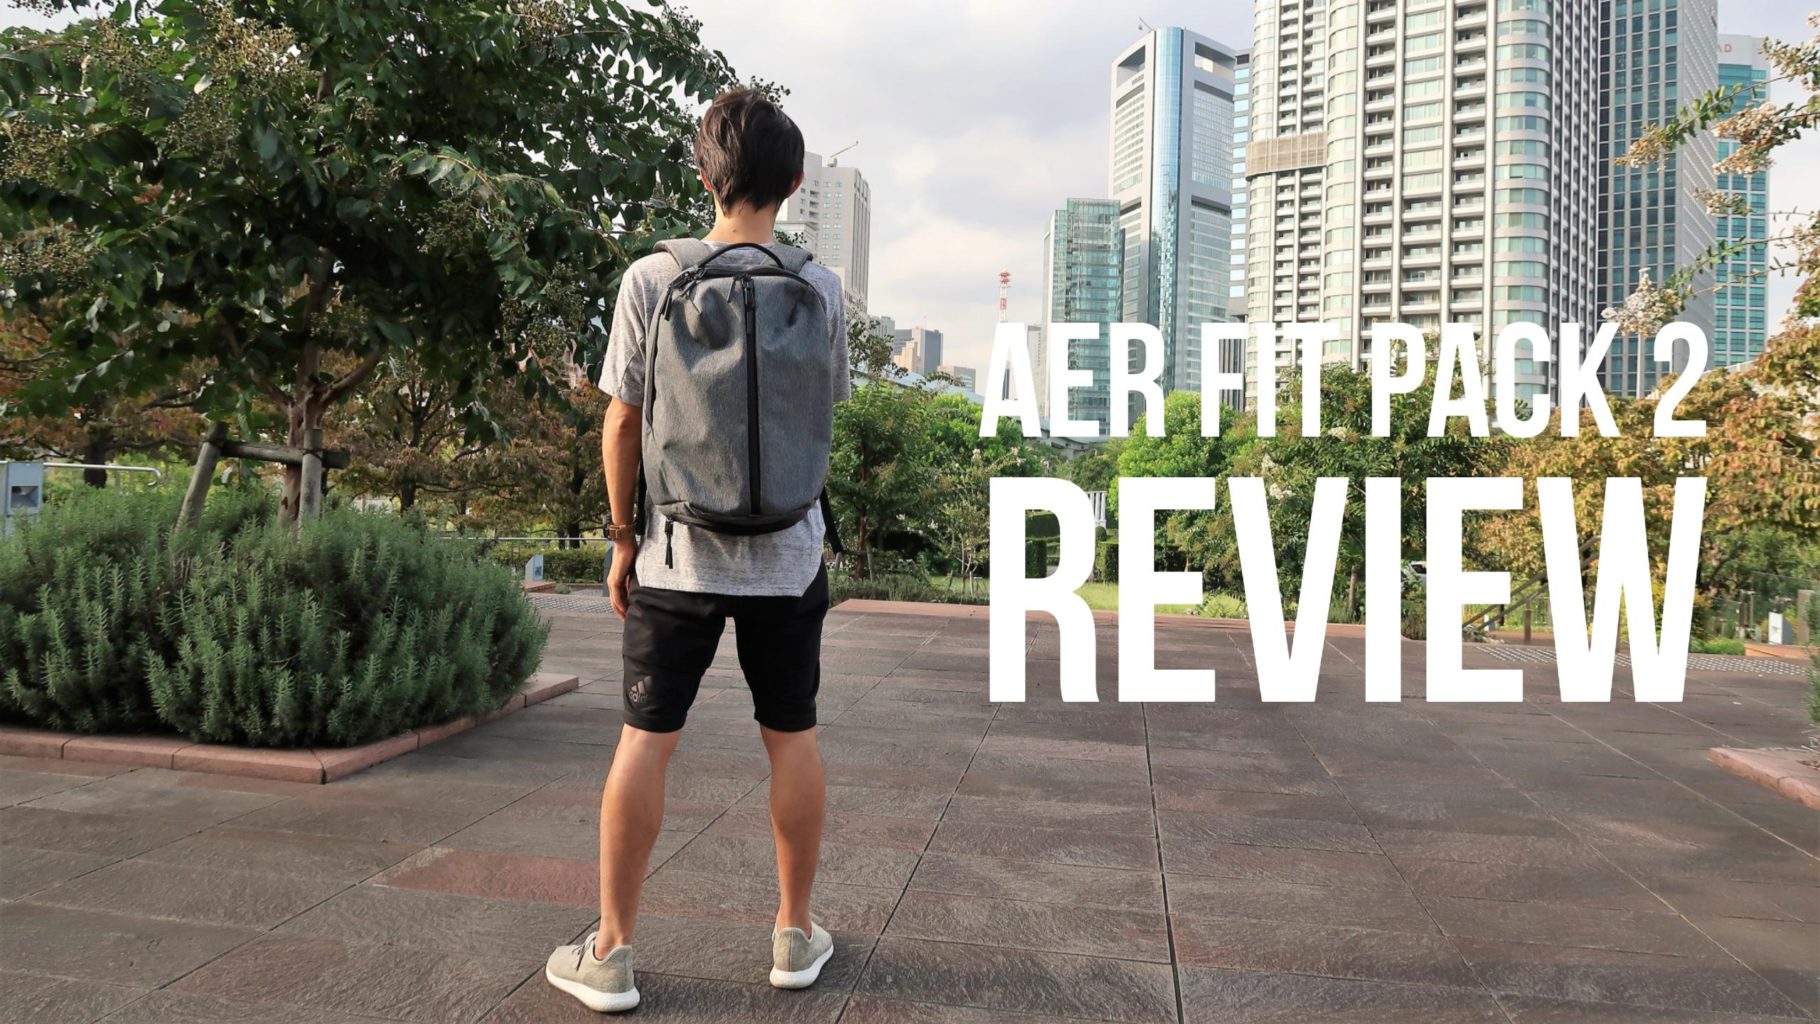 Aer Fit Pack 2 - The Fit Pack is Back, and It Got Even Better